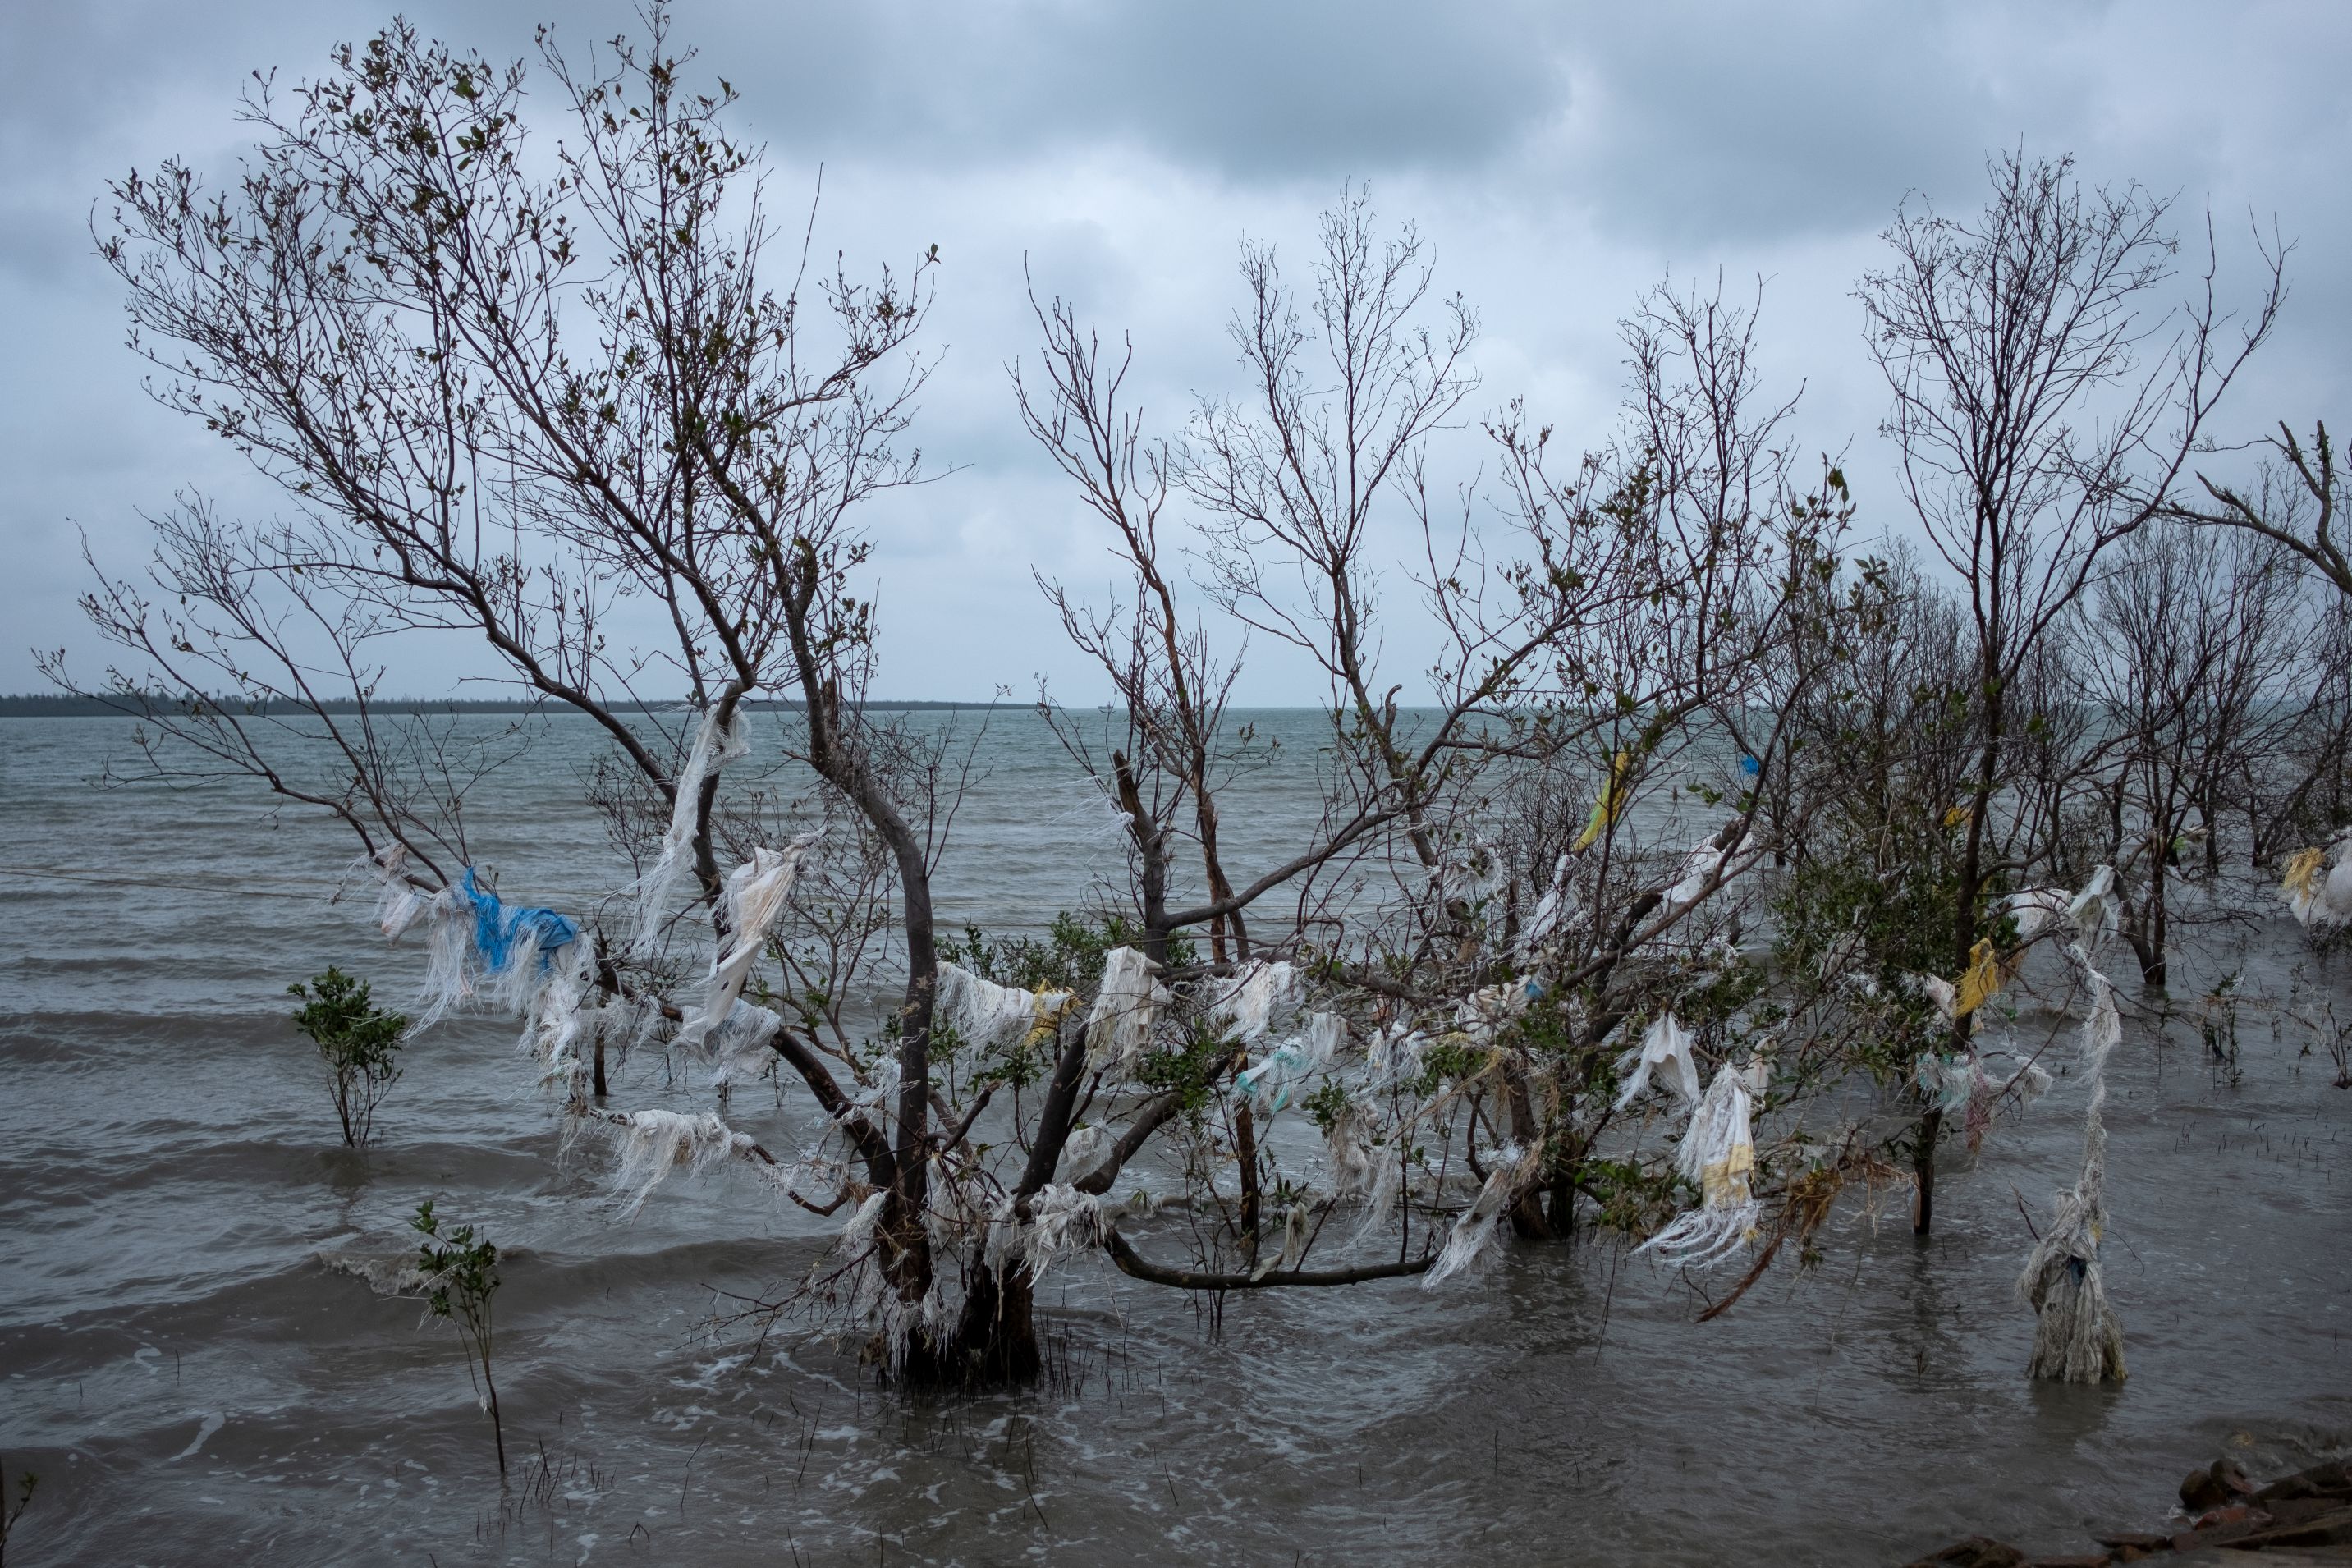 Locals’ possessions have been stuck on trees due to the rising sea level. (Image: WaterAid, Subhrajit Sen)  